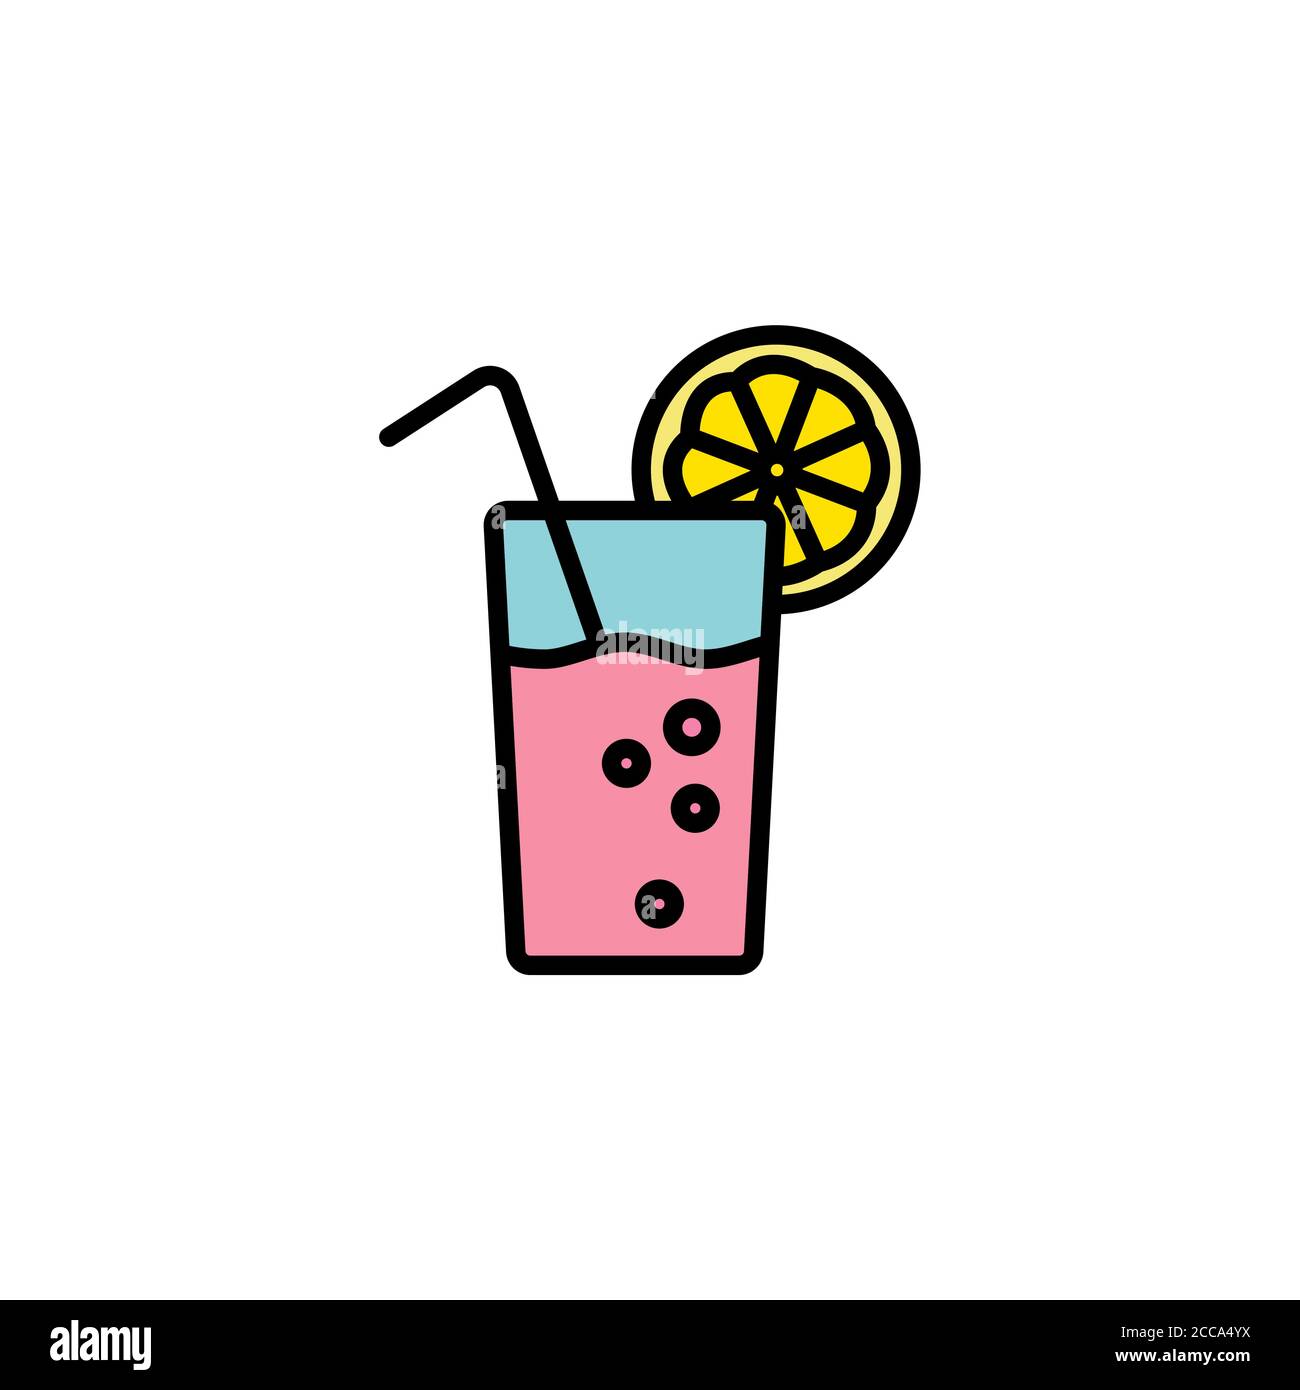 https://c8.alamy.com/comp/2CCA4YX/glass-of-lemonade-with-straw-and-lemon-slice-linear-vector-icon-cold-beverage-in-glass-with-lemon-and-straw-line-thin-sign-refreshing-summer-drink-2CCA4YX.jpg